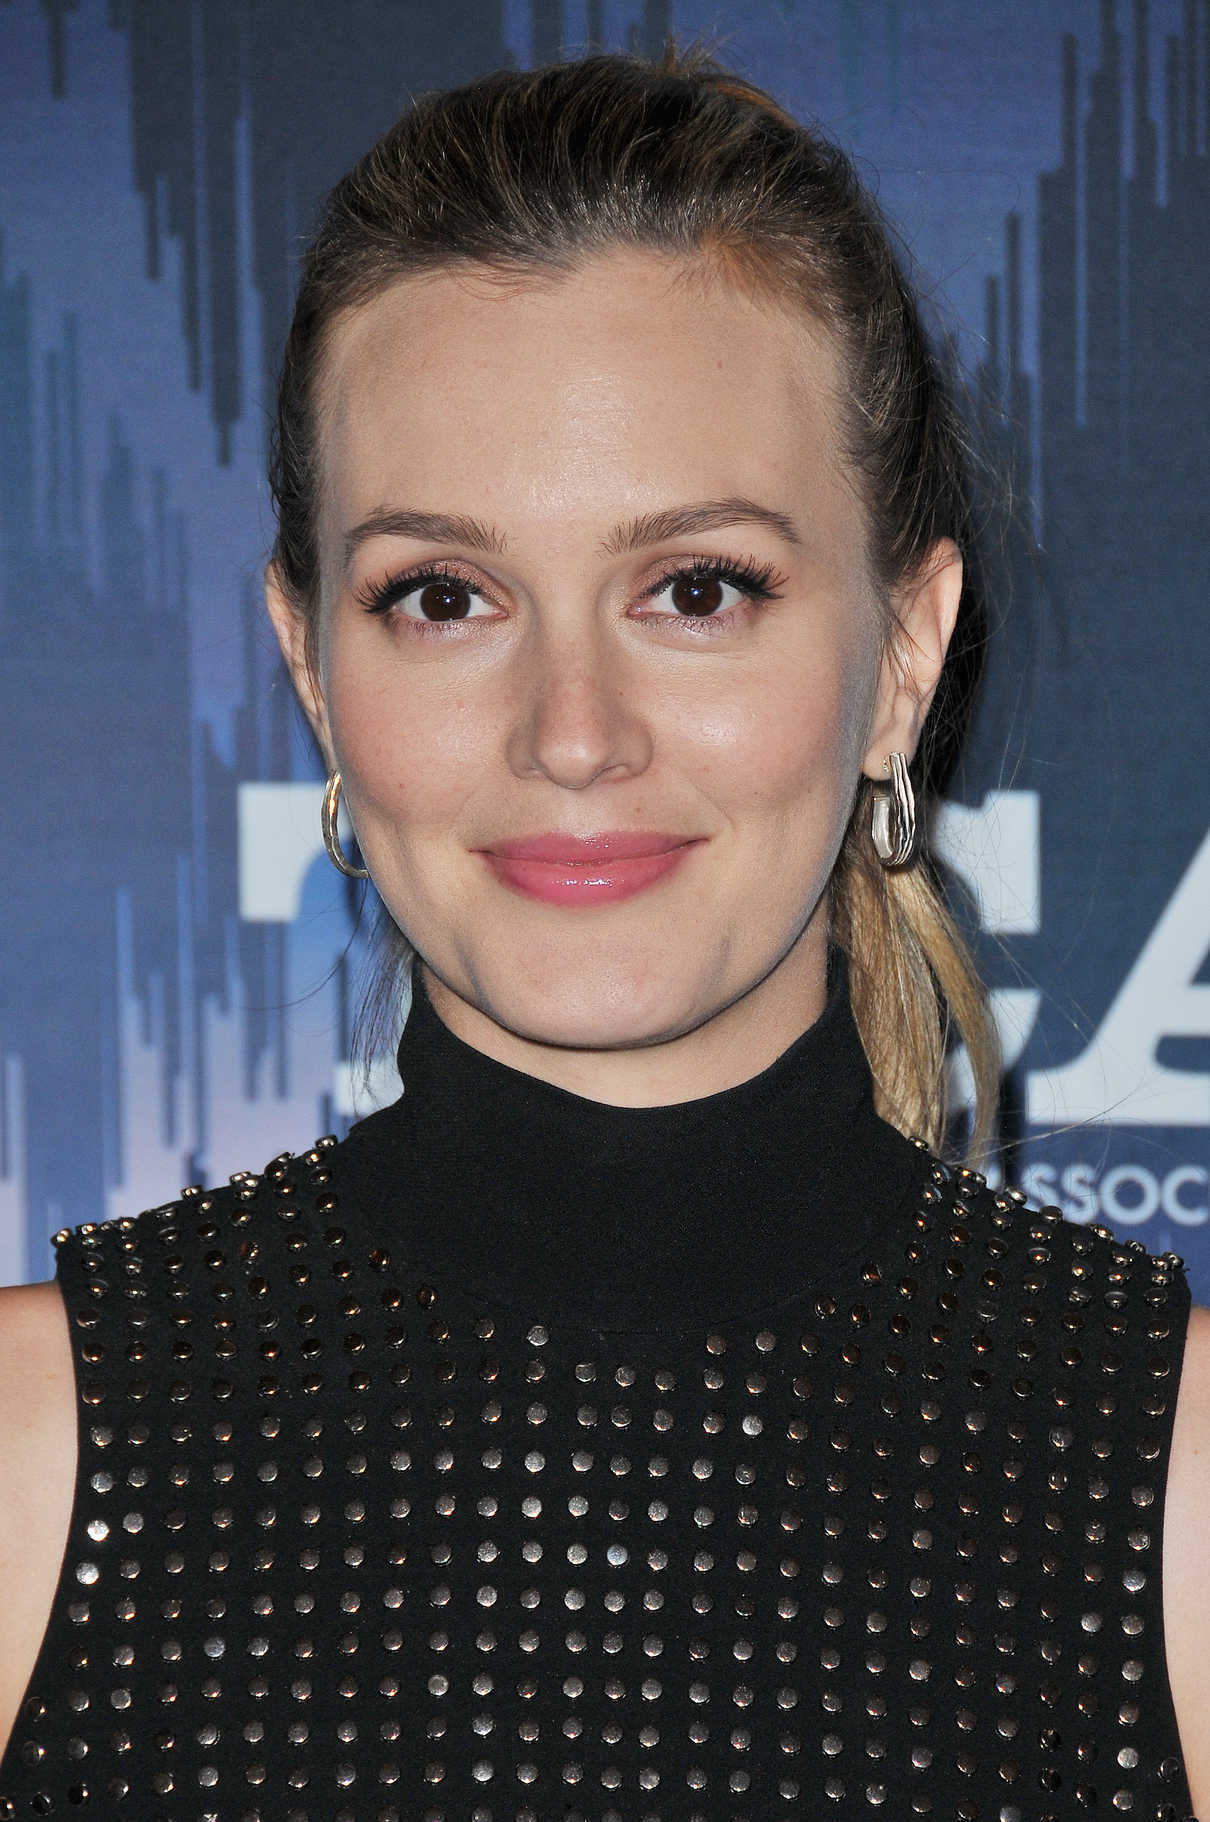 Leighton Meester at the FOX All-Star Party During the 2017 Winter TCA Tour in Pasadena 01/11/2017-4